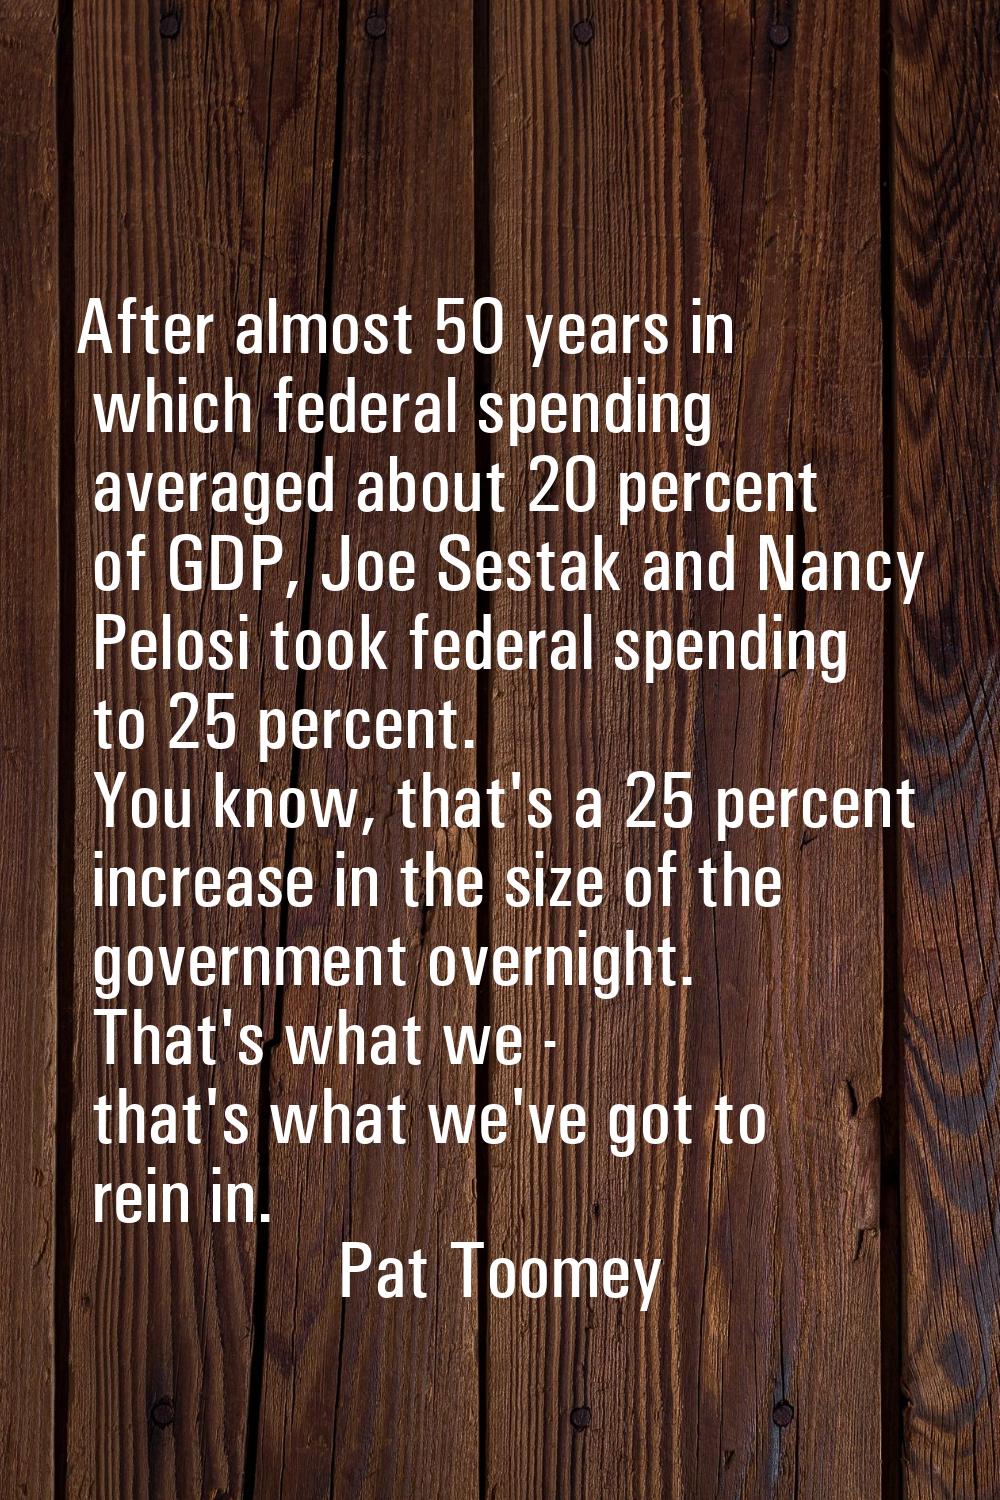 After almost 50 years in which federal spending averaged about 20 percent of GDP, Joe Sestak and Na